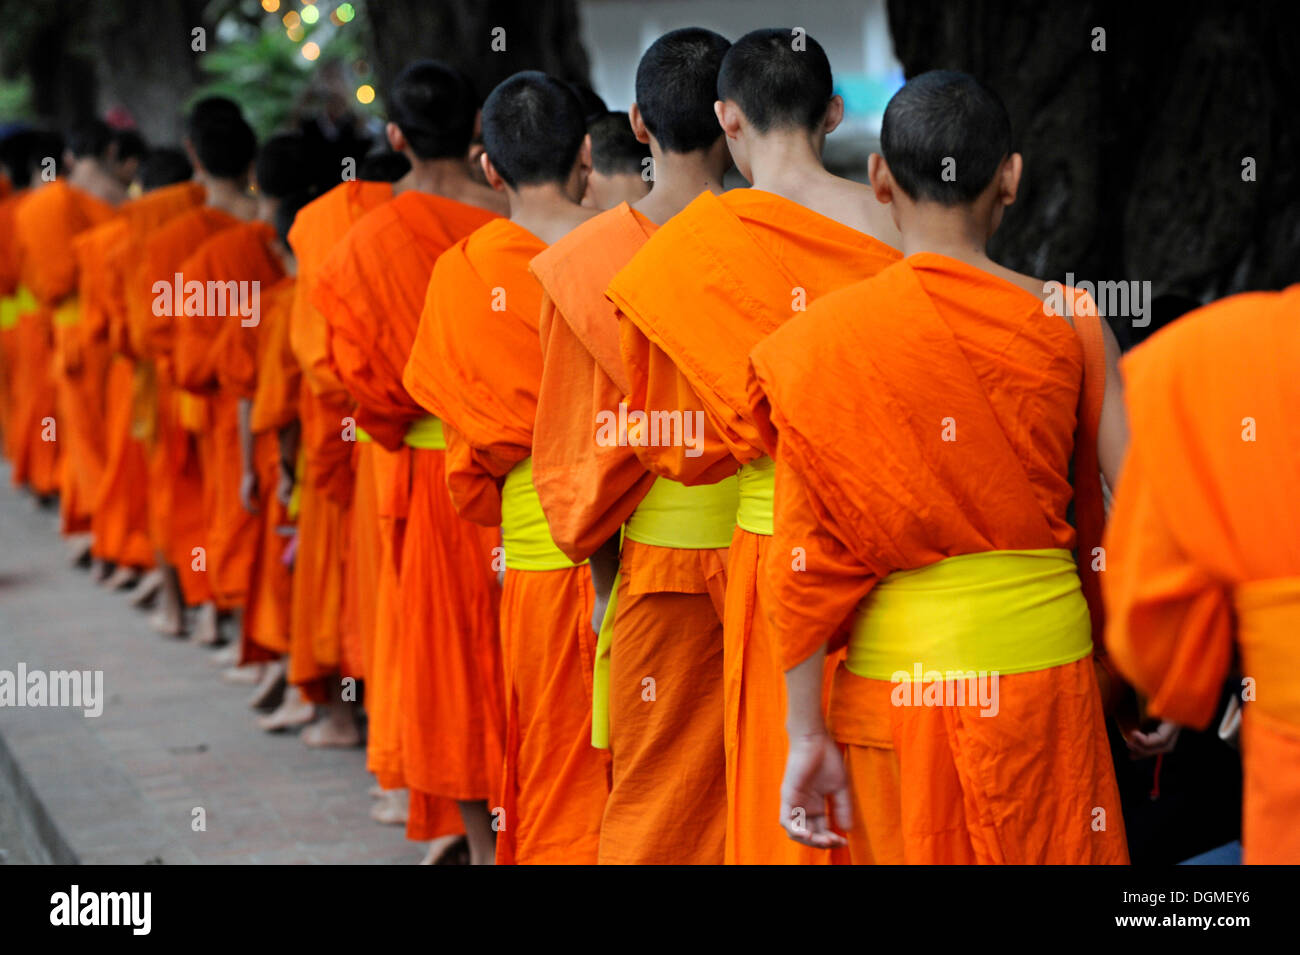 Morning begging for alms of the Buddhist monks, Luang Prabang, Laos, Southeast Asia, Asia Stock Photo